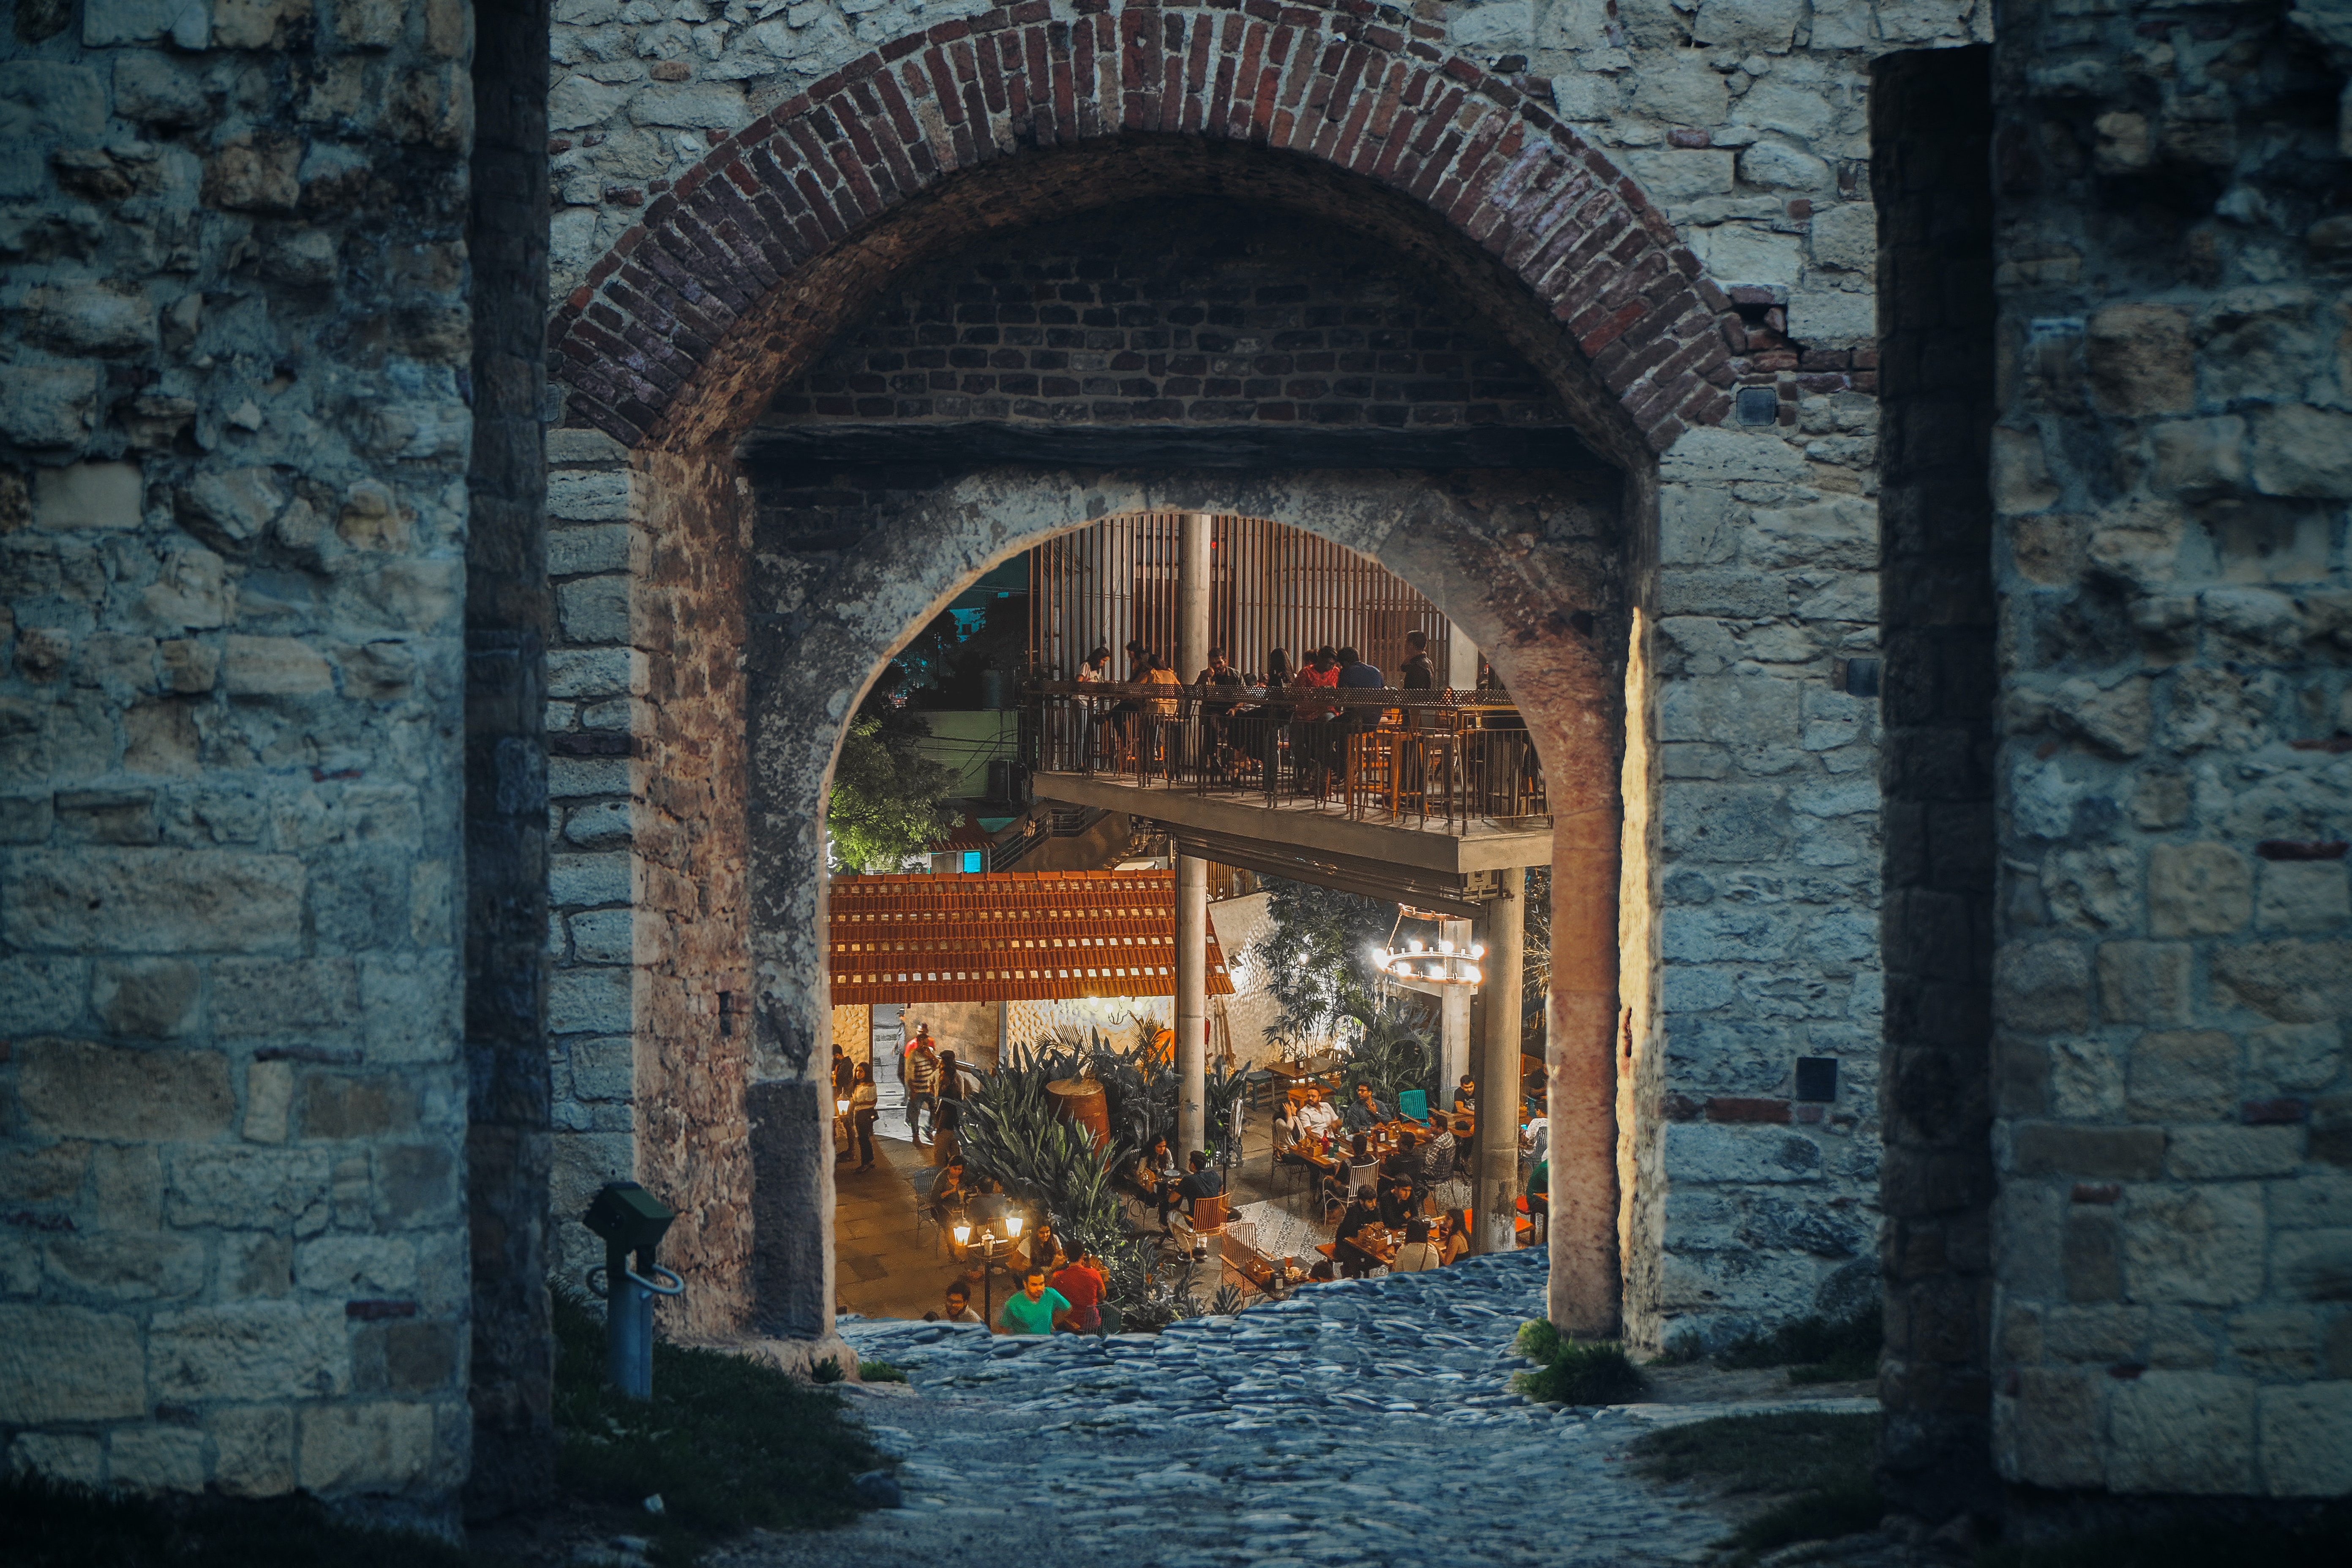 Old stone Greystone fortress walls with an arched reddish brown 2 brick wide soldier course arch over the opening. A smoothed, worn, and well-trodden limestone path leads through the opening, where it splits left and right behind the wall. The background opens to a lower-level courtyard with tables and people gathering in what looks like a celebration.  A second level to the right is supported by two round grey concrete pillars with more people sitting at tables and standing, it is an outdoor courtyard with small trees and red brown tile 